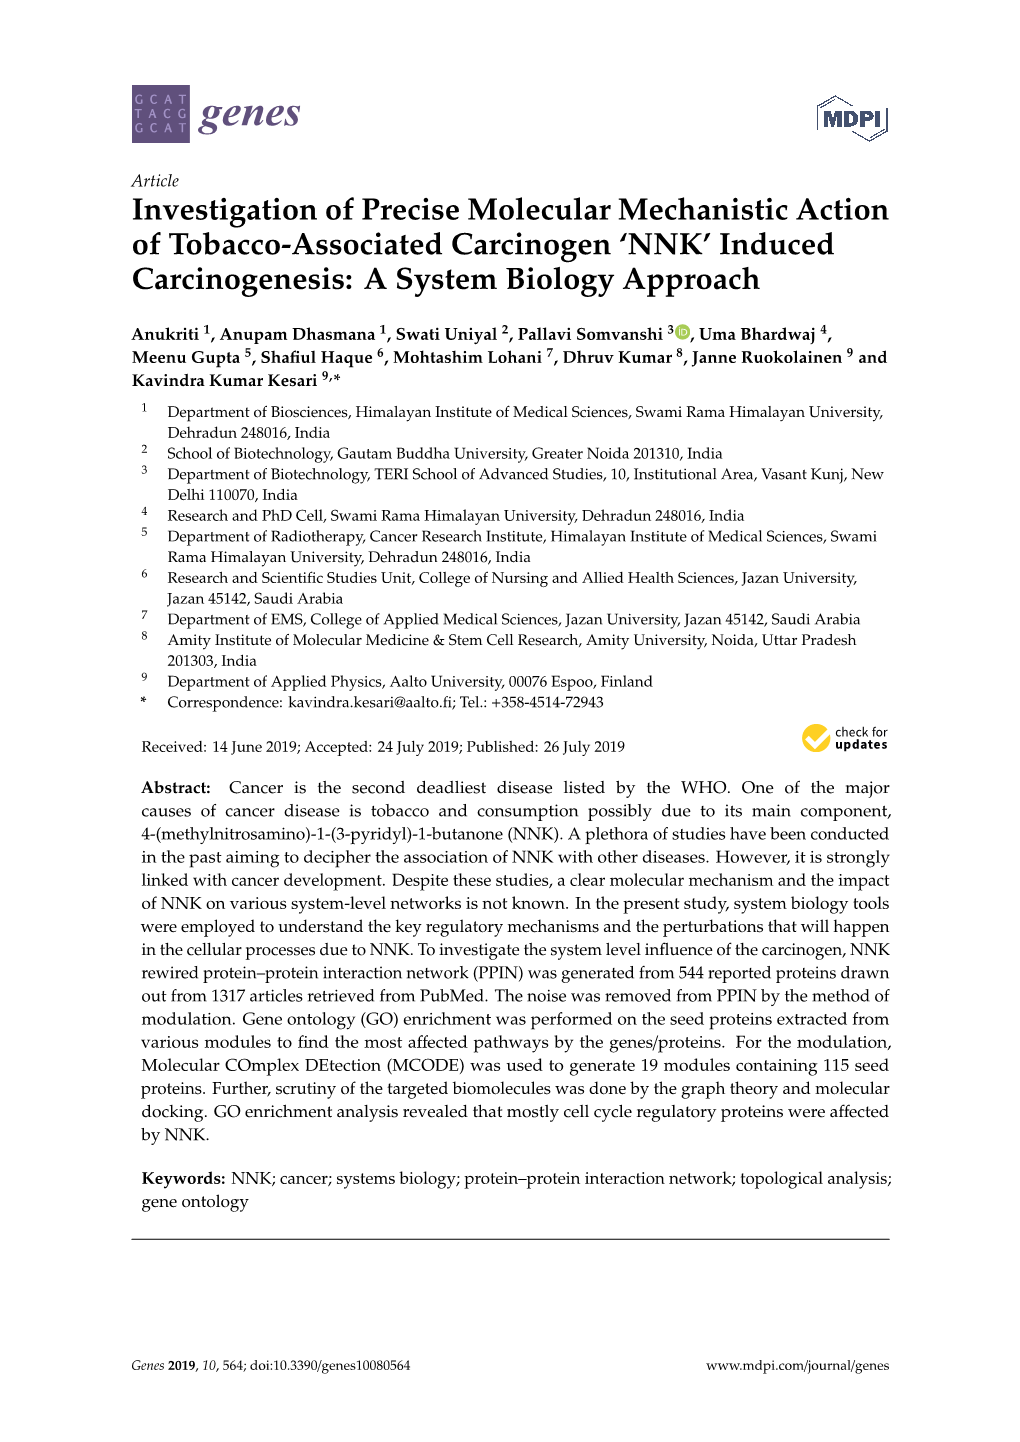 Investigation of Precise Molecular Mechanistic Action of Tobacco-Associated Carcinogen 'NNK' Induced Carcinogenesis: a Syste